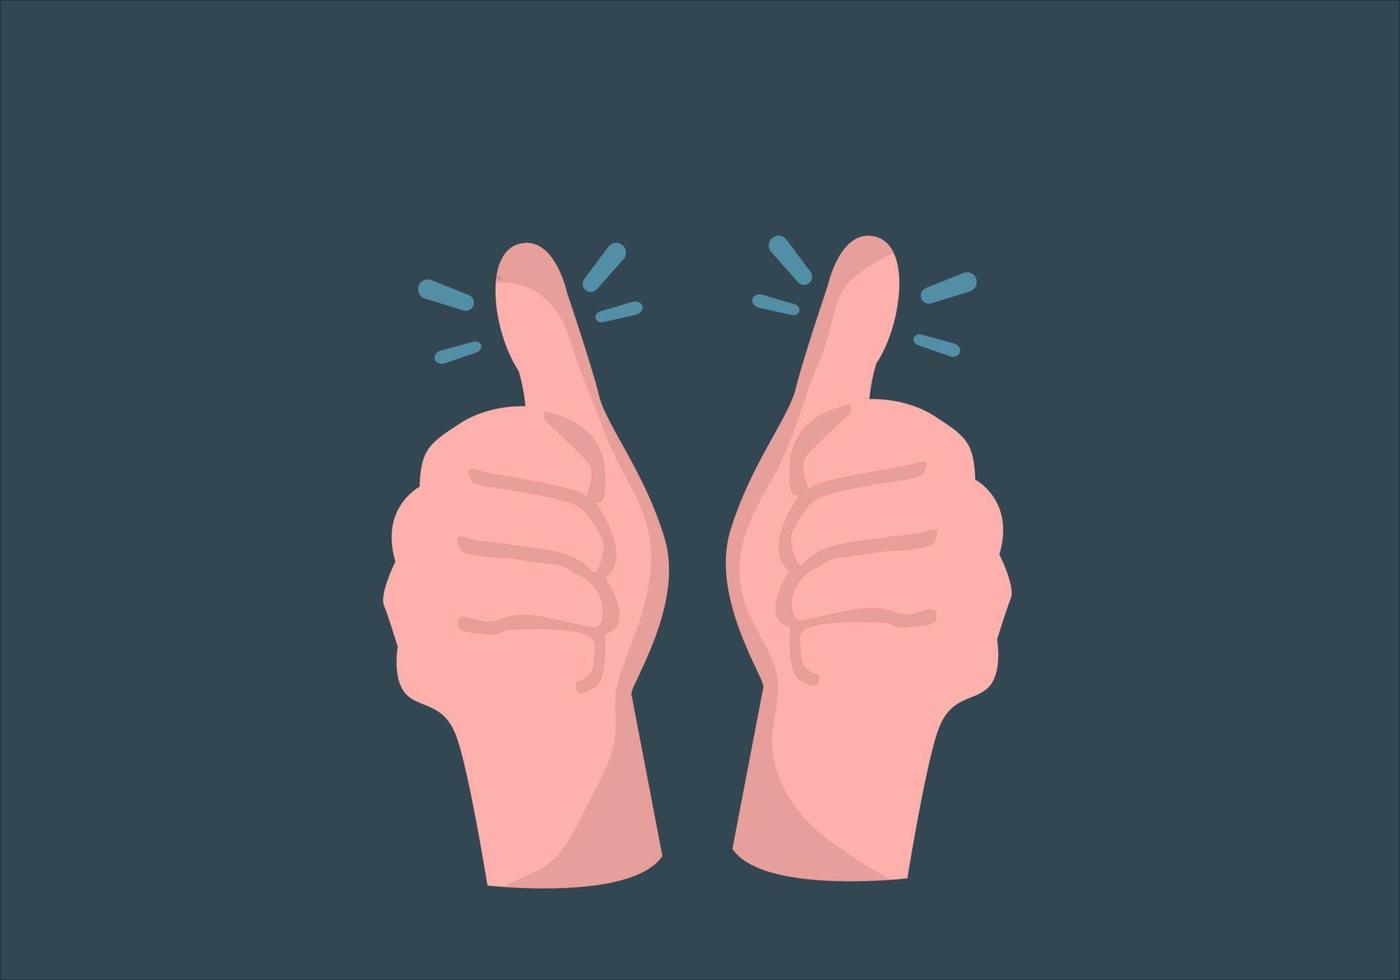 Praise with thumbs up It symbolizes a business idea for looking for skills that someone can do something well. vector